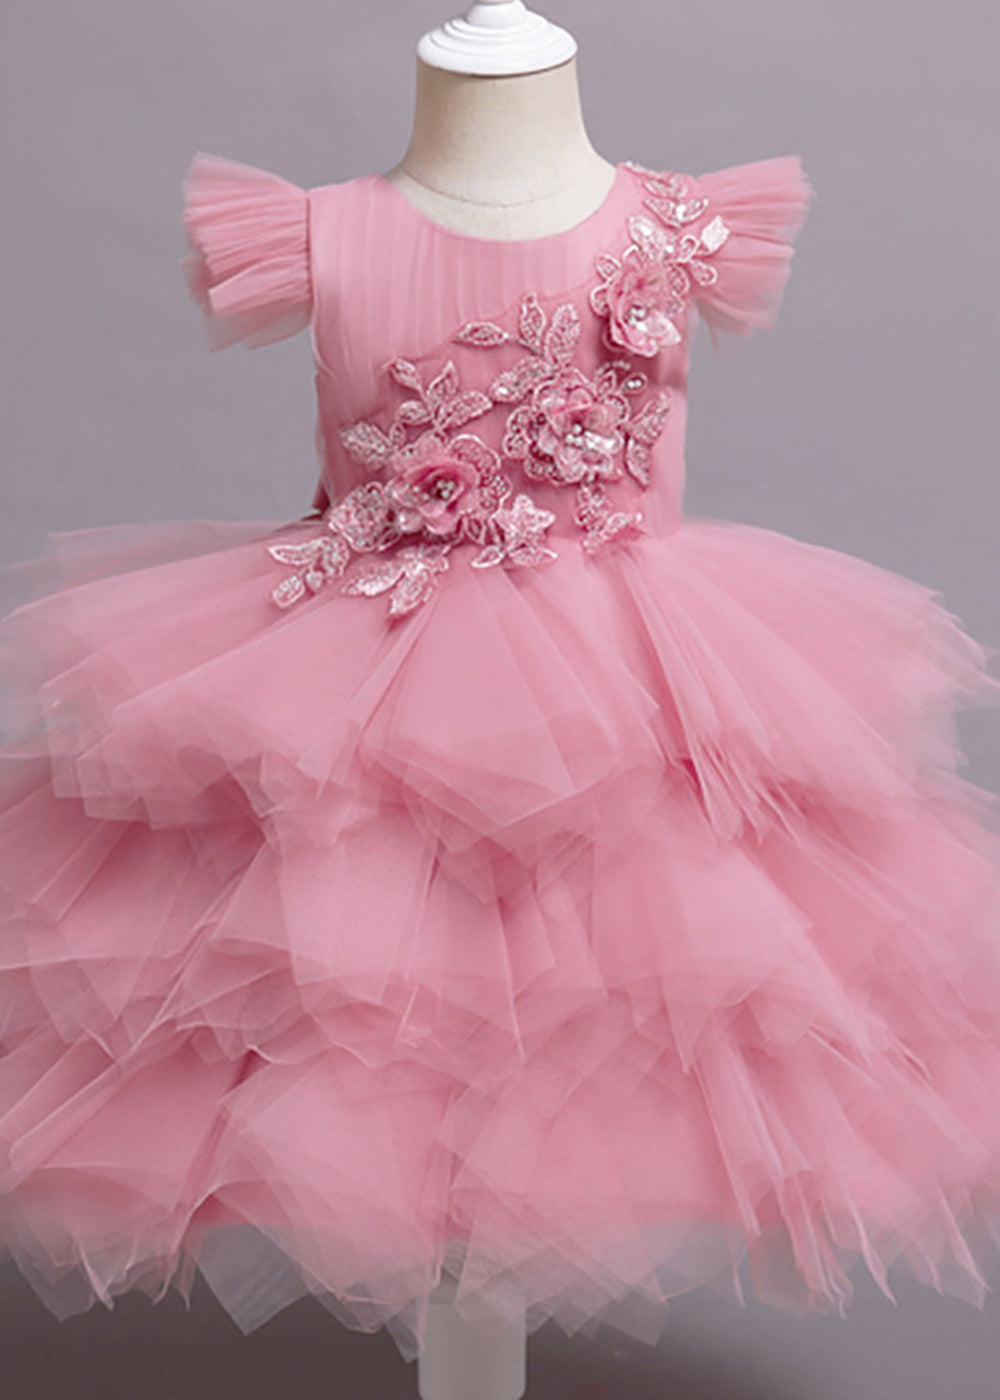 Dusty Rose Round Neck Appliques A-line Cap Sleeve Tulle Flower Girl Dress With Bow